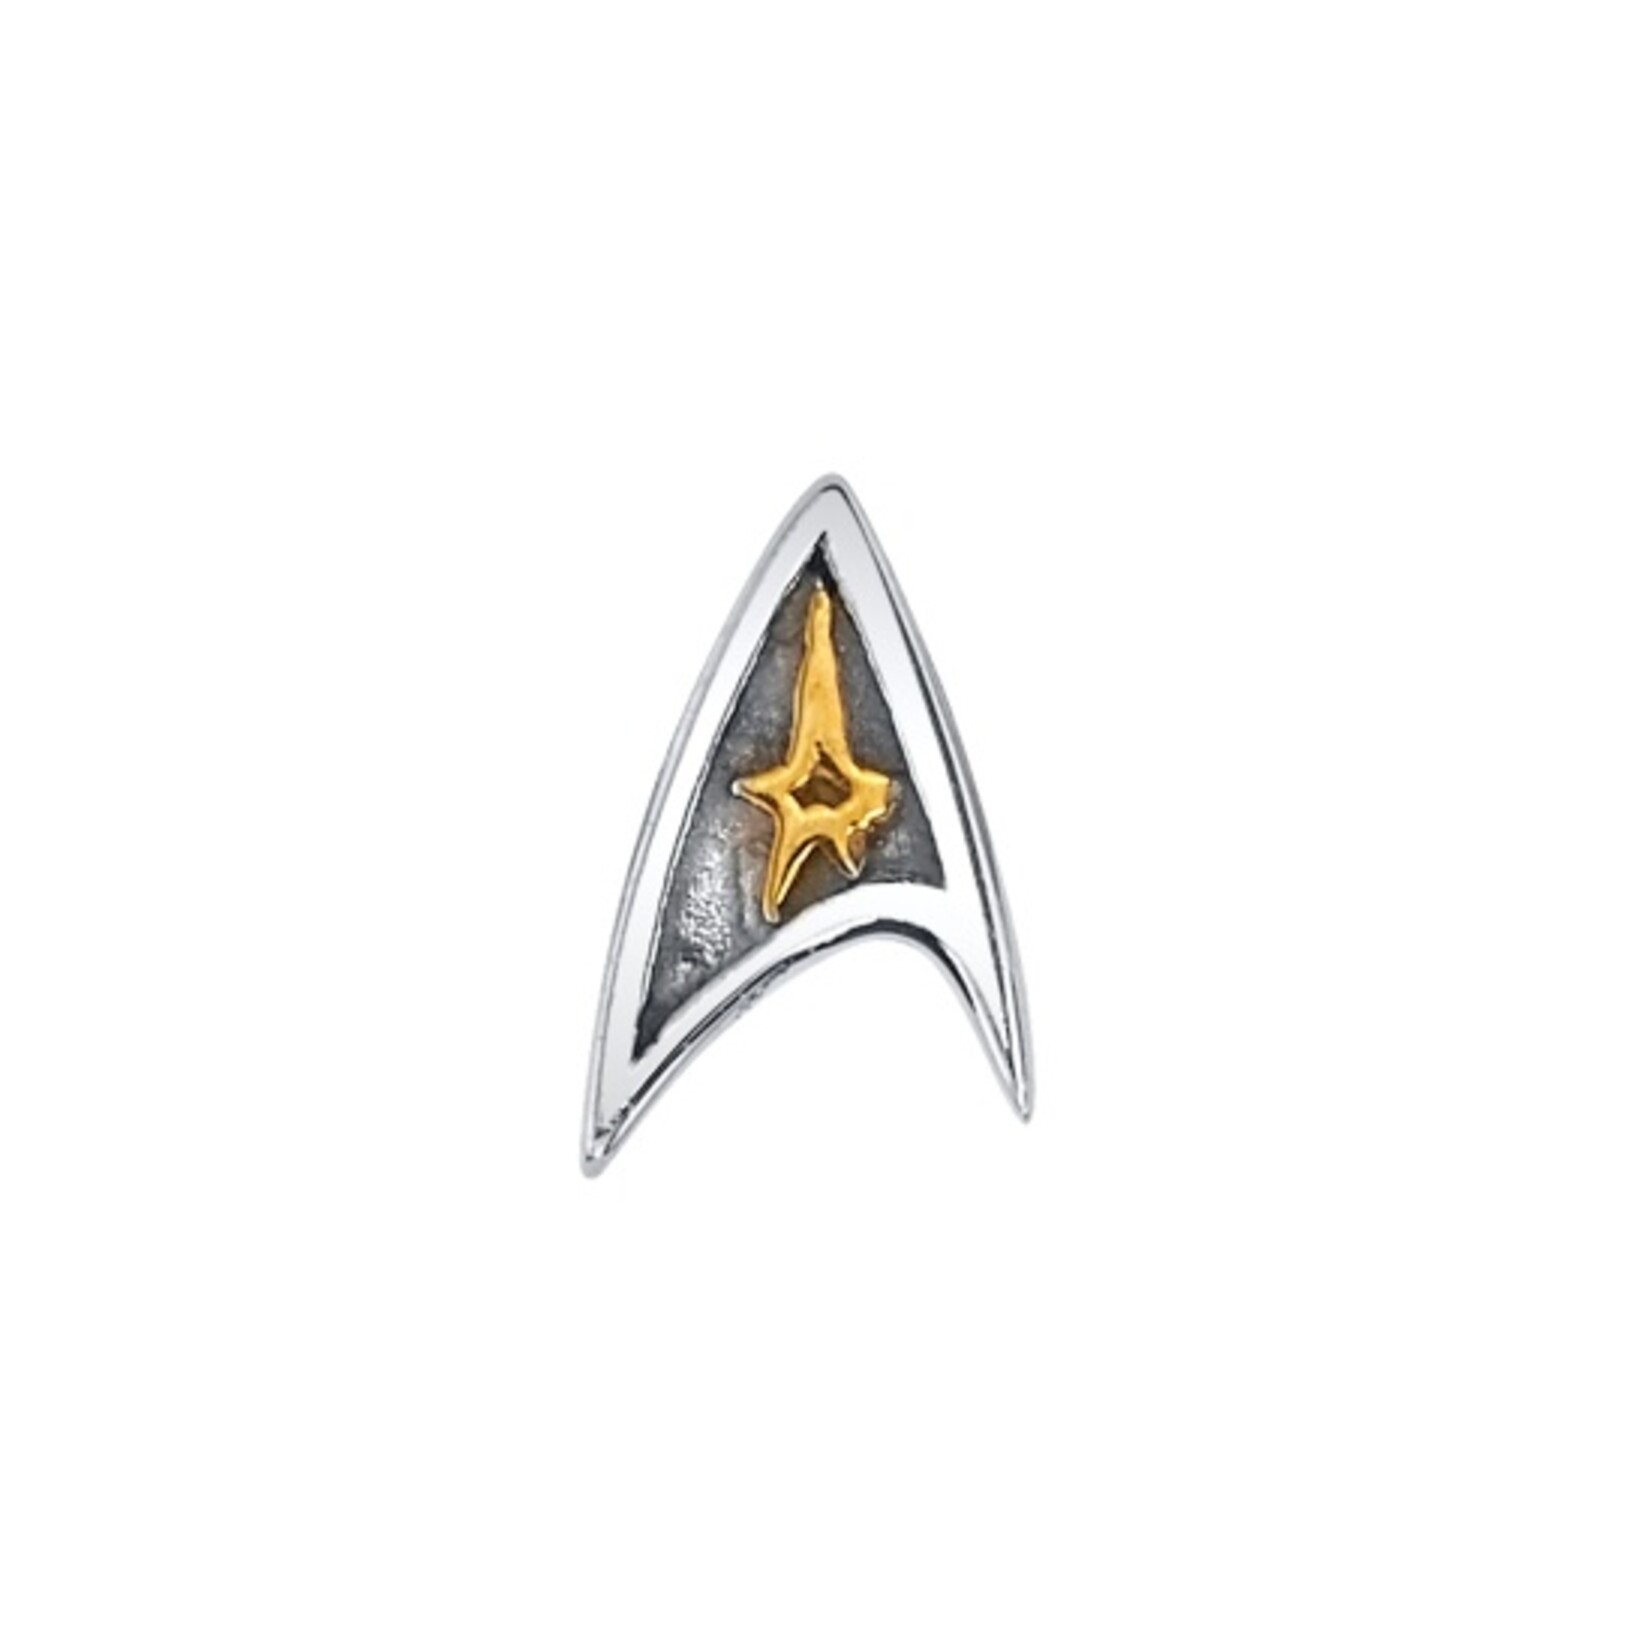 BVLA BVLA 5.0 "Space Geezer" Star Trek insignia threaded end with 24K plate highlight